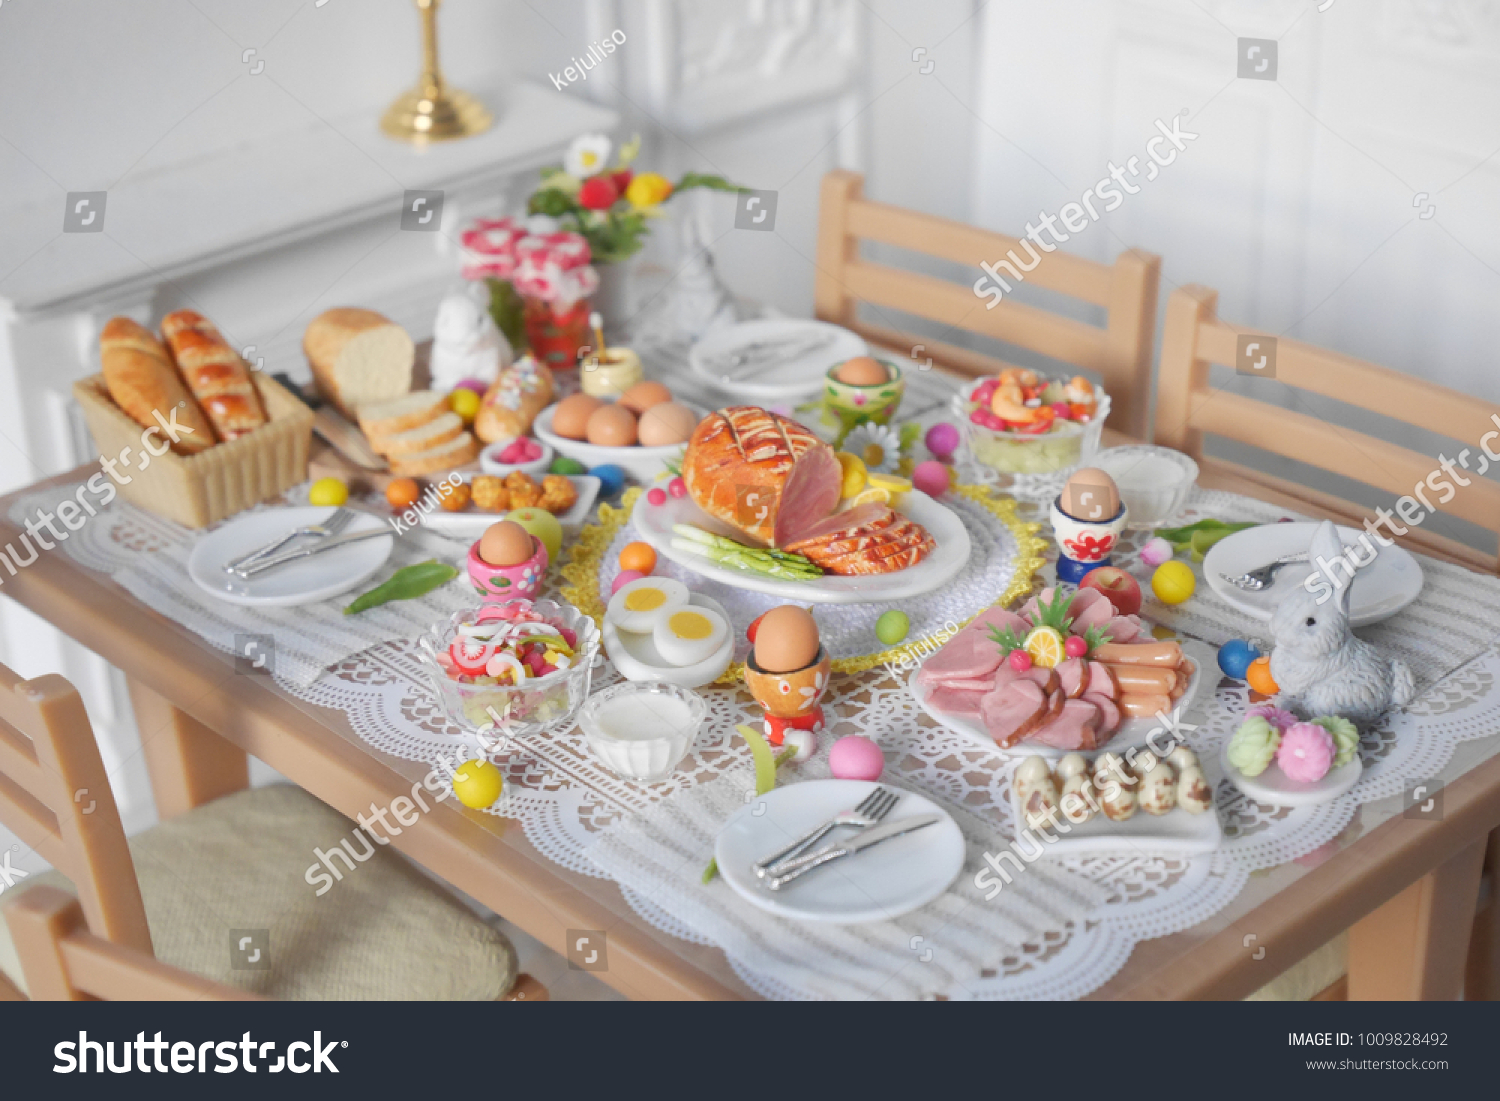 Breakfast Brunch Table Setting Easter Meal Stock Photo Edit Now 1009828492